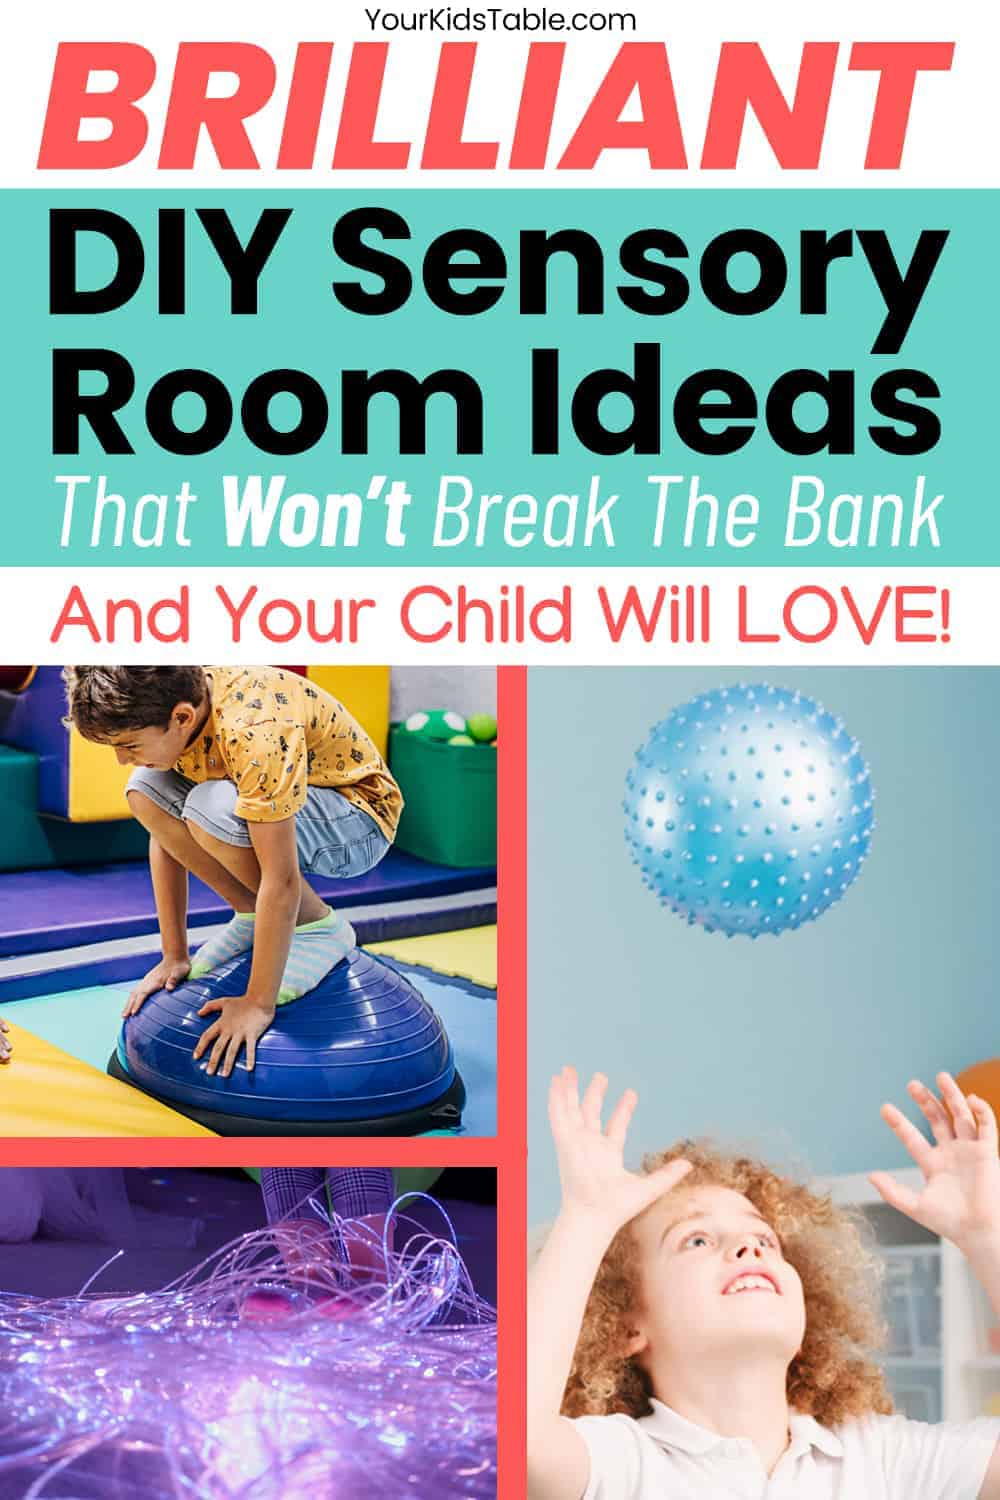 Building a Room for Teens with Sensory - Help Your Teens